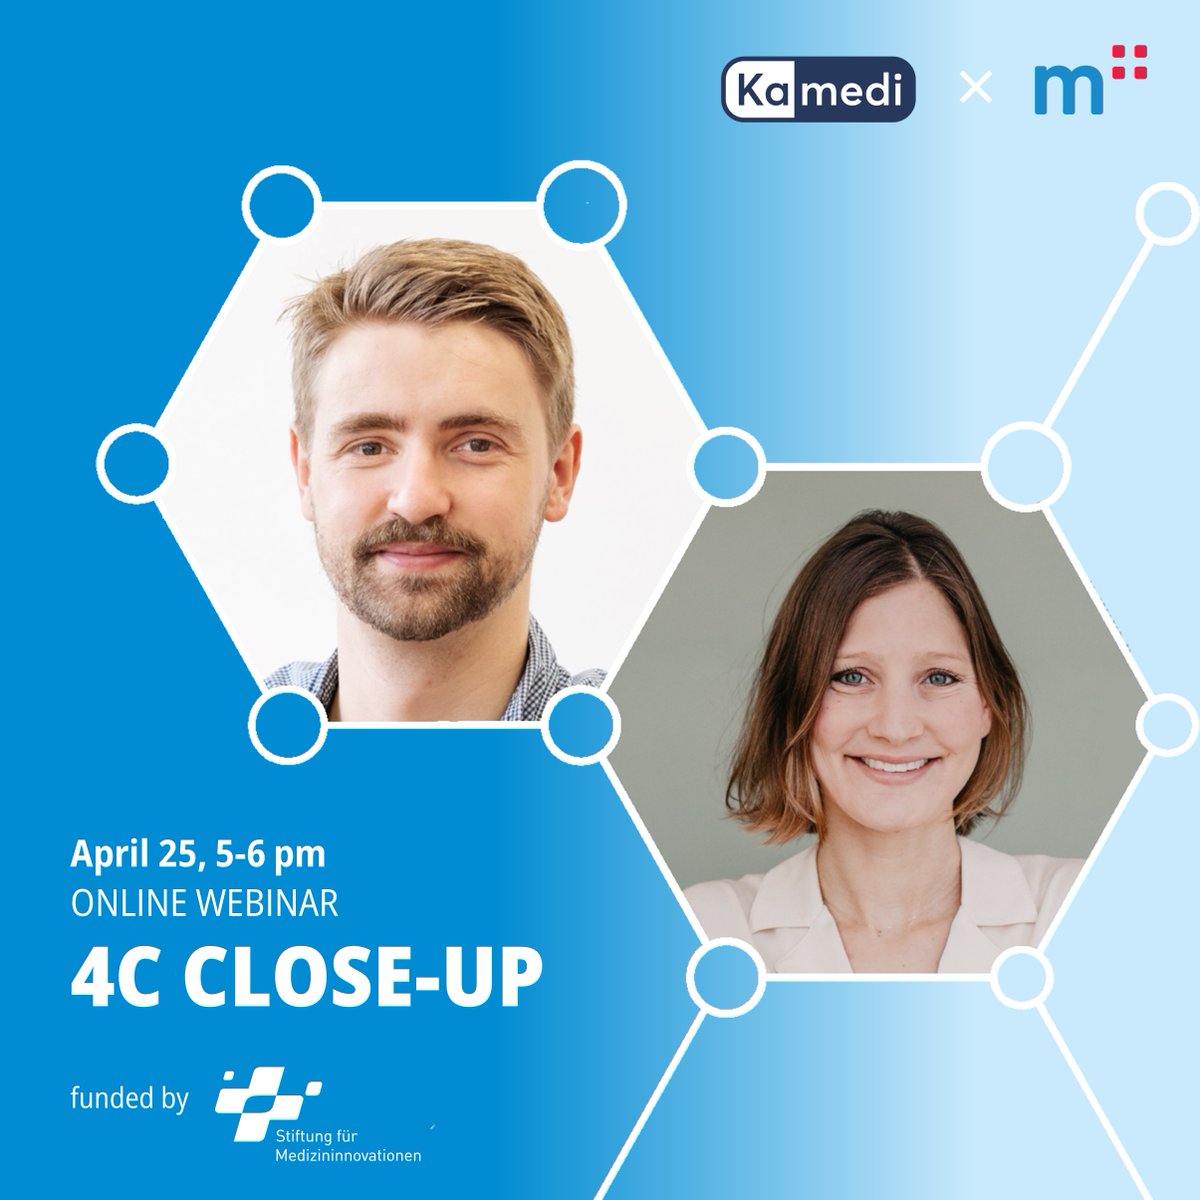 On April 25 our next #4CCloseup webinar will take place. This time it is about #RequirementsEngineering together with Stefan from the Startup Kamedi and MII Startup Coach Henrike – will you join?
 
Sign up here for free: mi-incubator.com/en/events-4c-c…